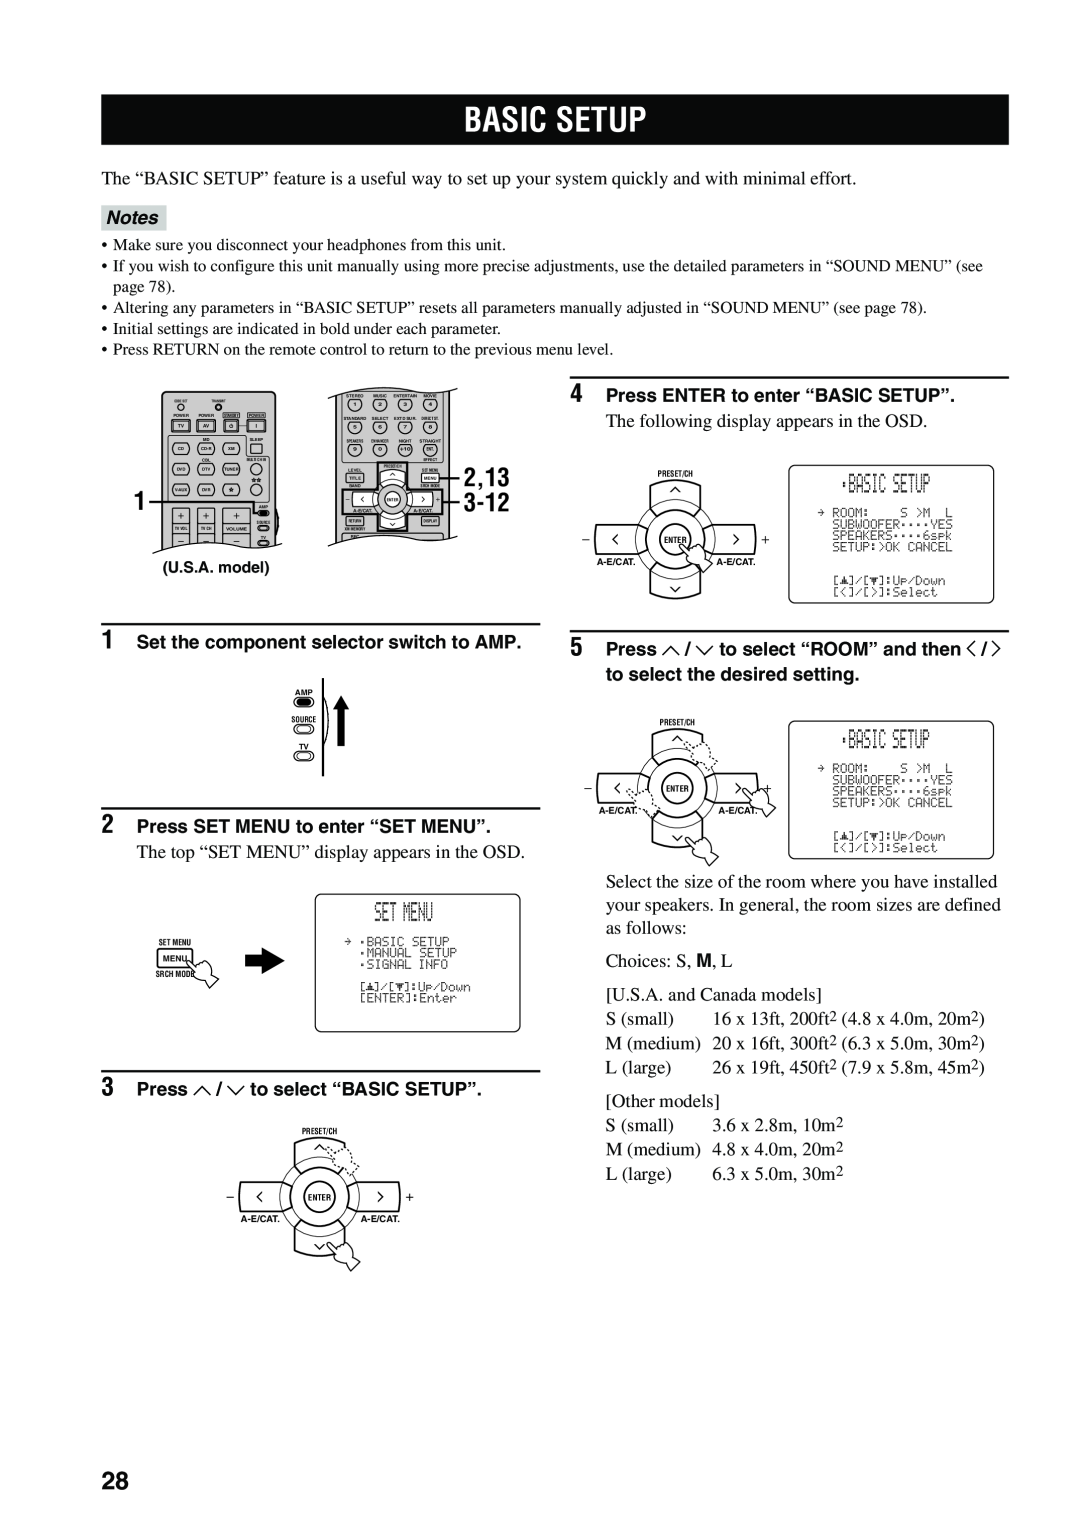 Yamaha RX-V559 owner manual Basic Setup, 2,13, 3-12, The following display appears in the OSD 